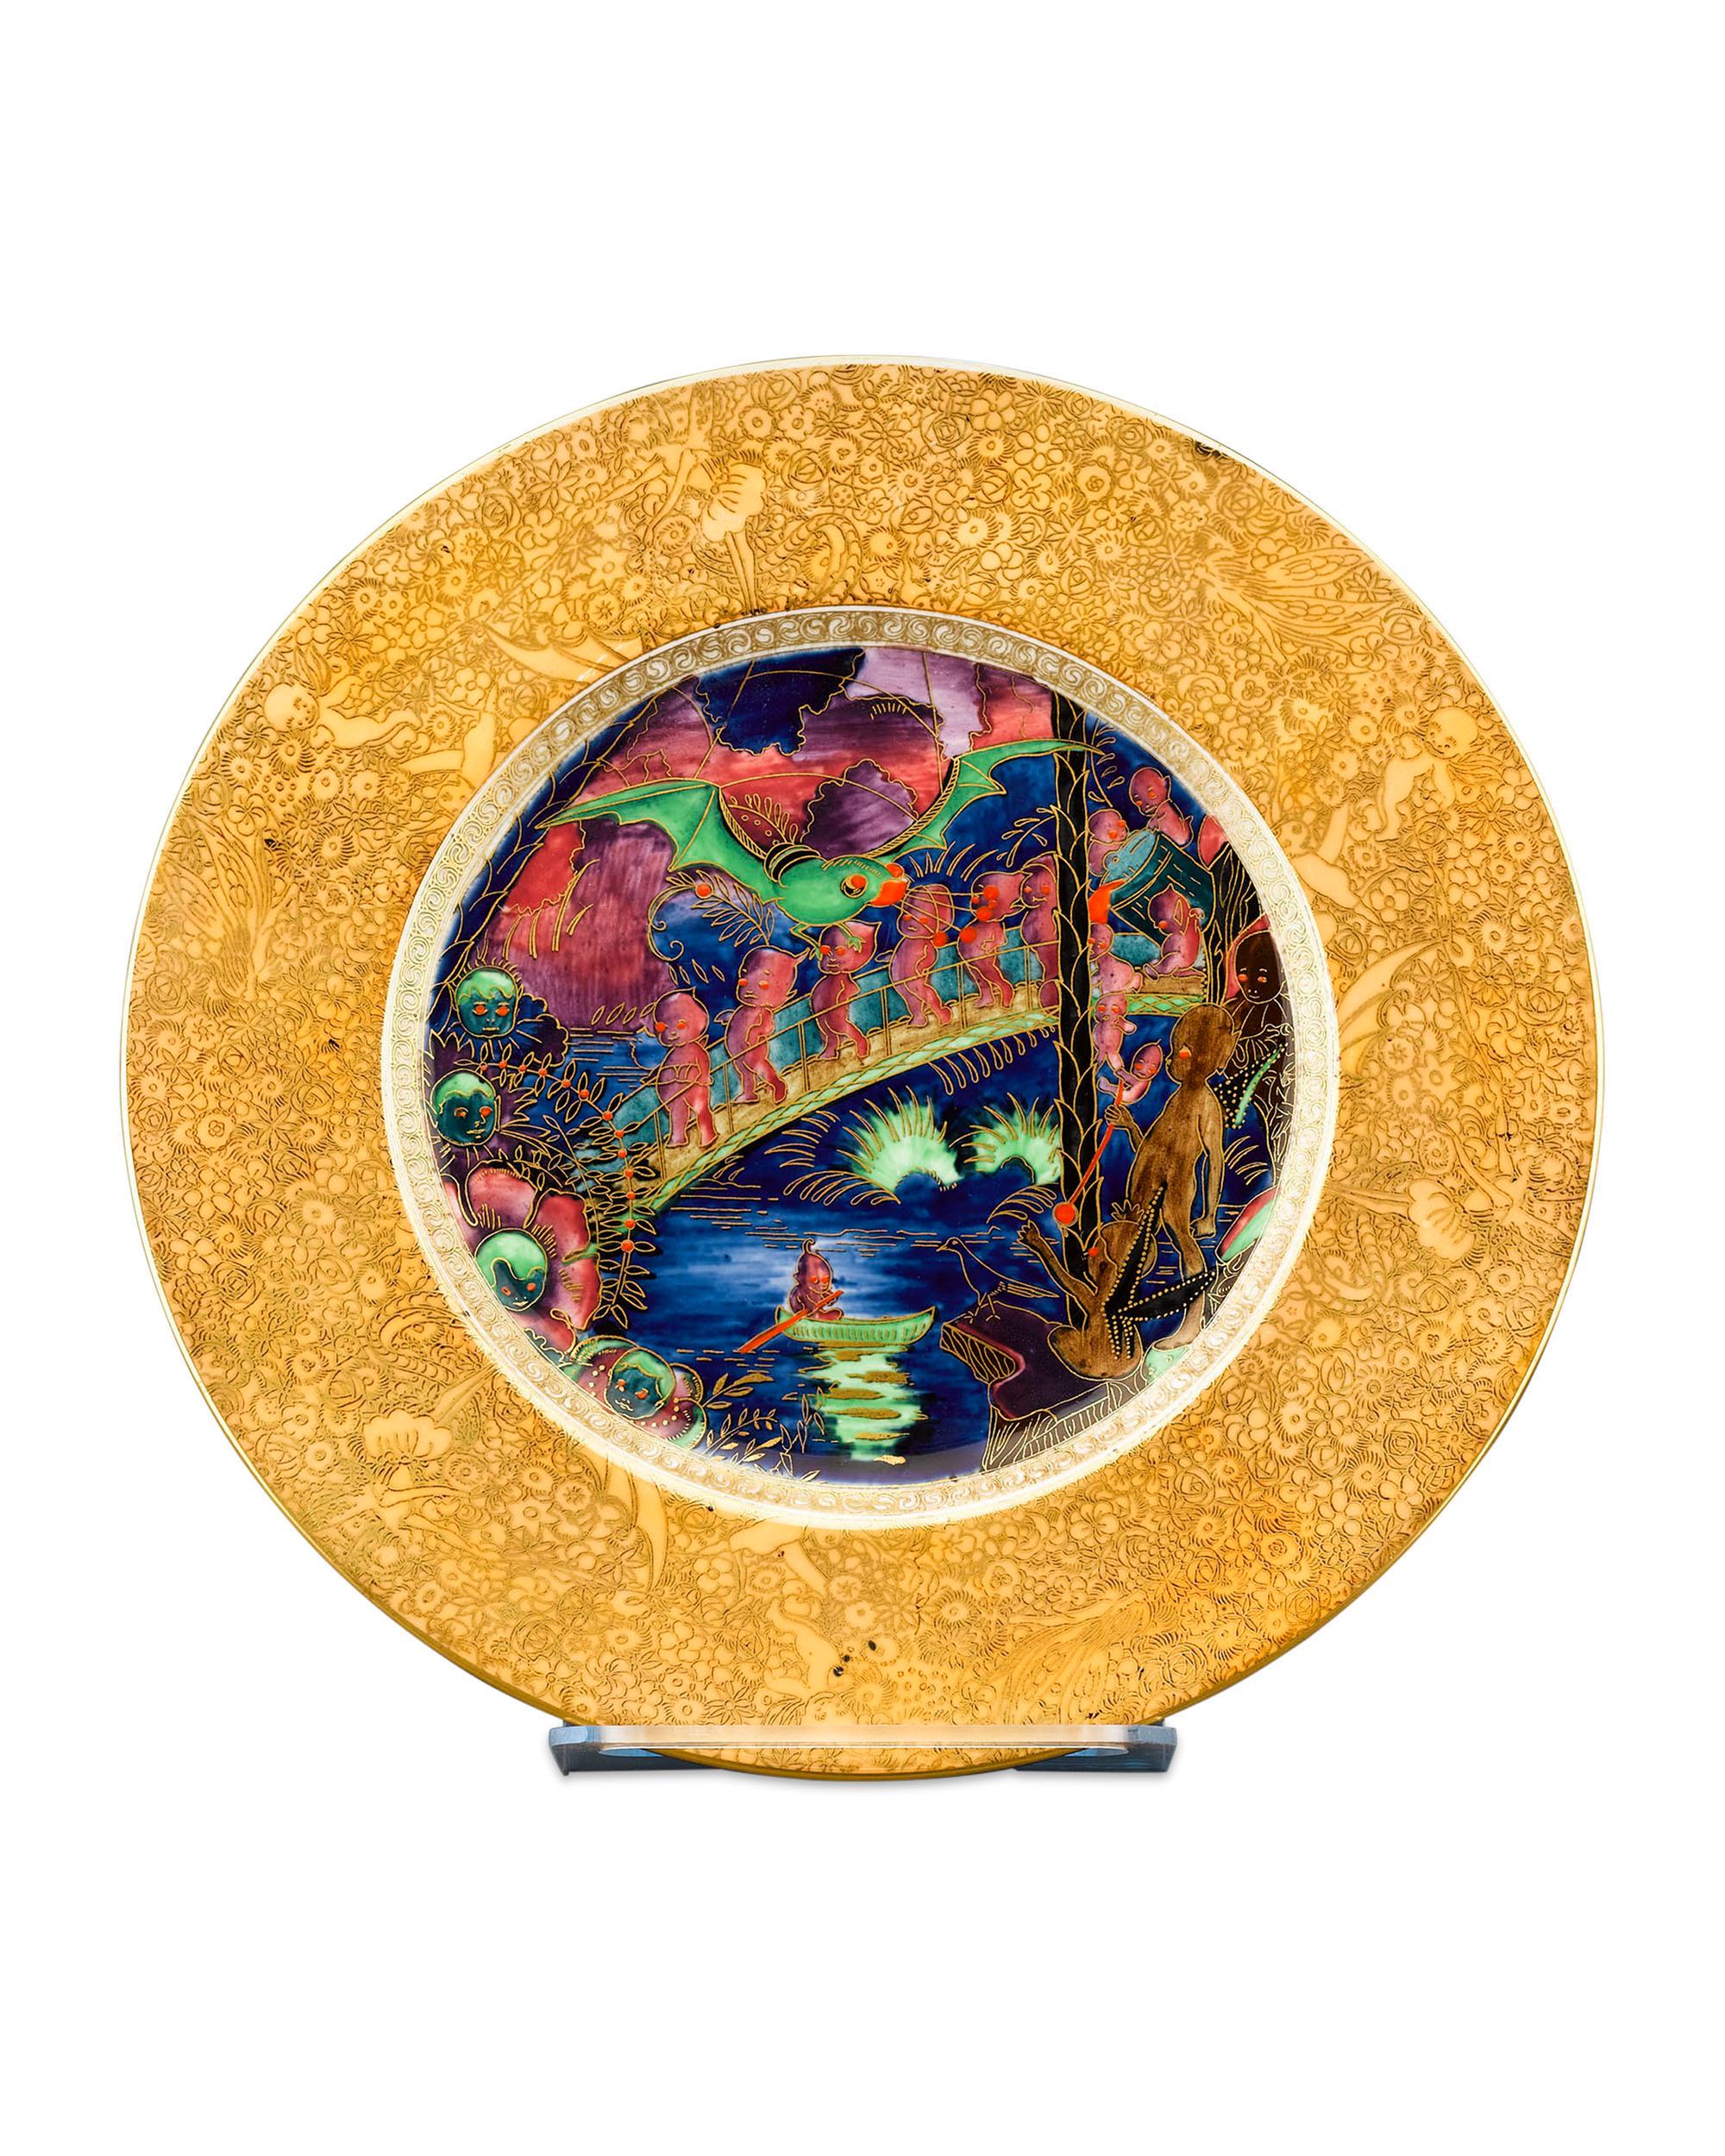 This enchanting Wedgwood Fairyland Lustre plate is decorated in a rare variation of the desirable Imps on a Bridge and Treehouse pattern. Called the Roc Centre variation, this magical scene is populated by maroon imps crossing a bridge with brown